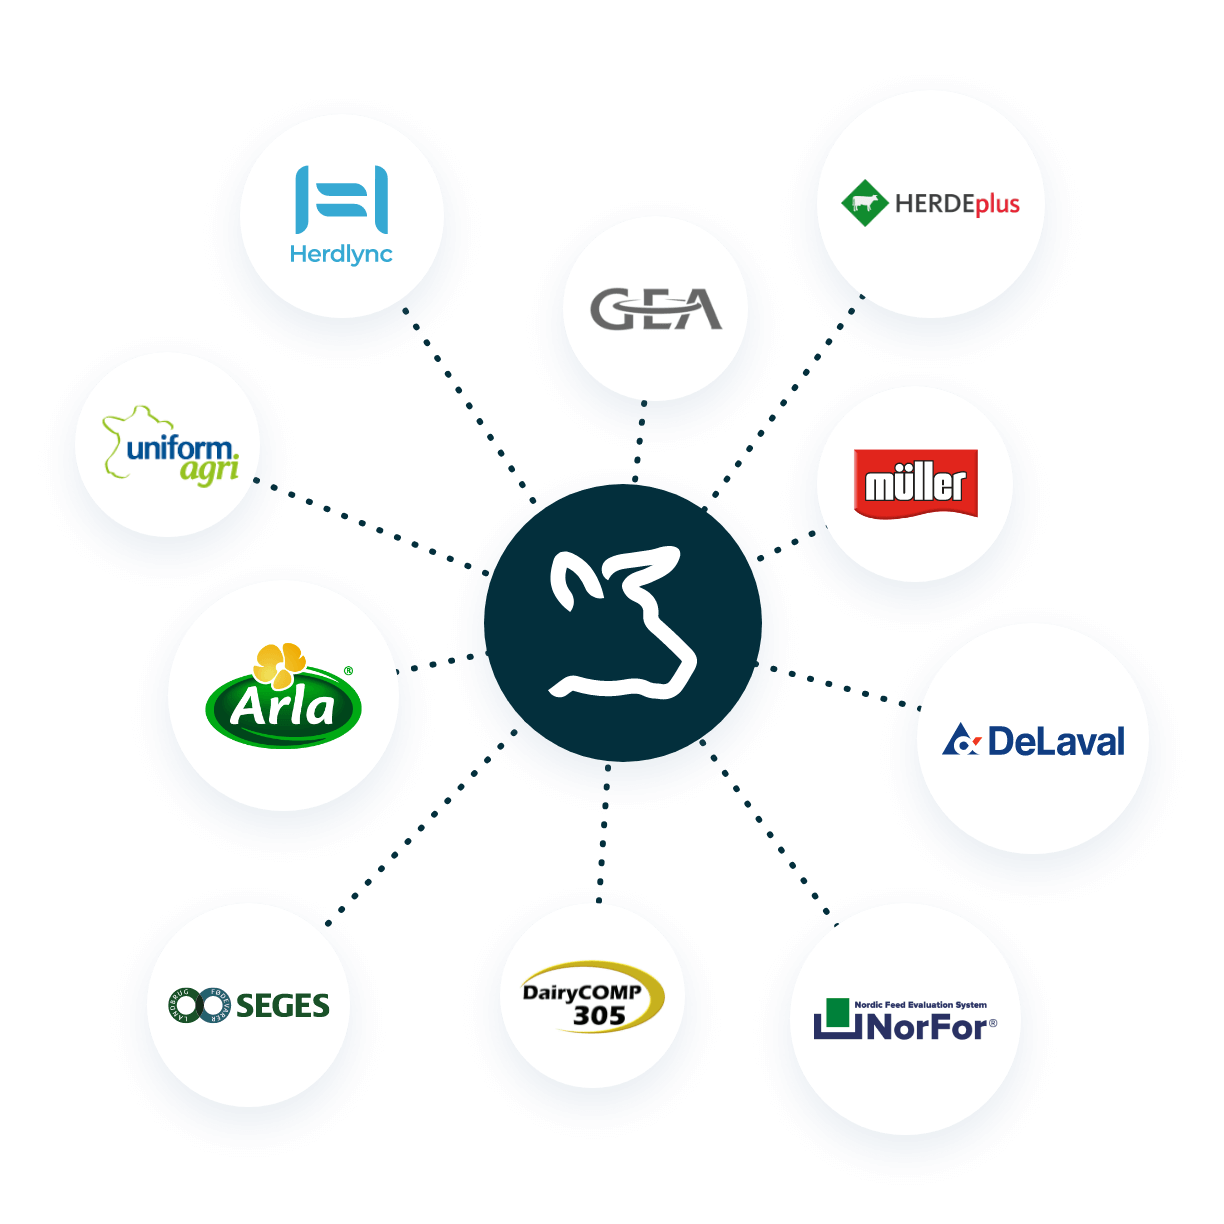 Cowconnect intermigrates with: Müller, DeLaval, Arla and more...